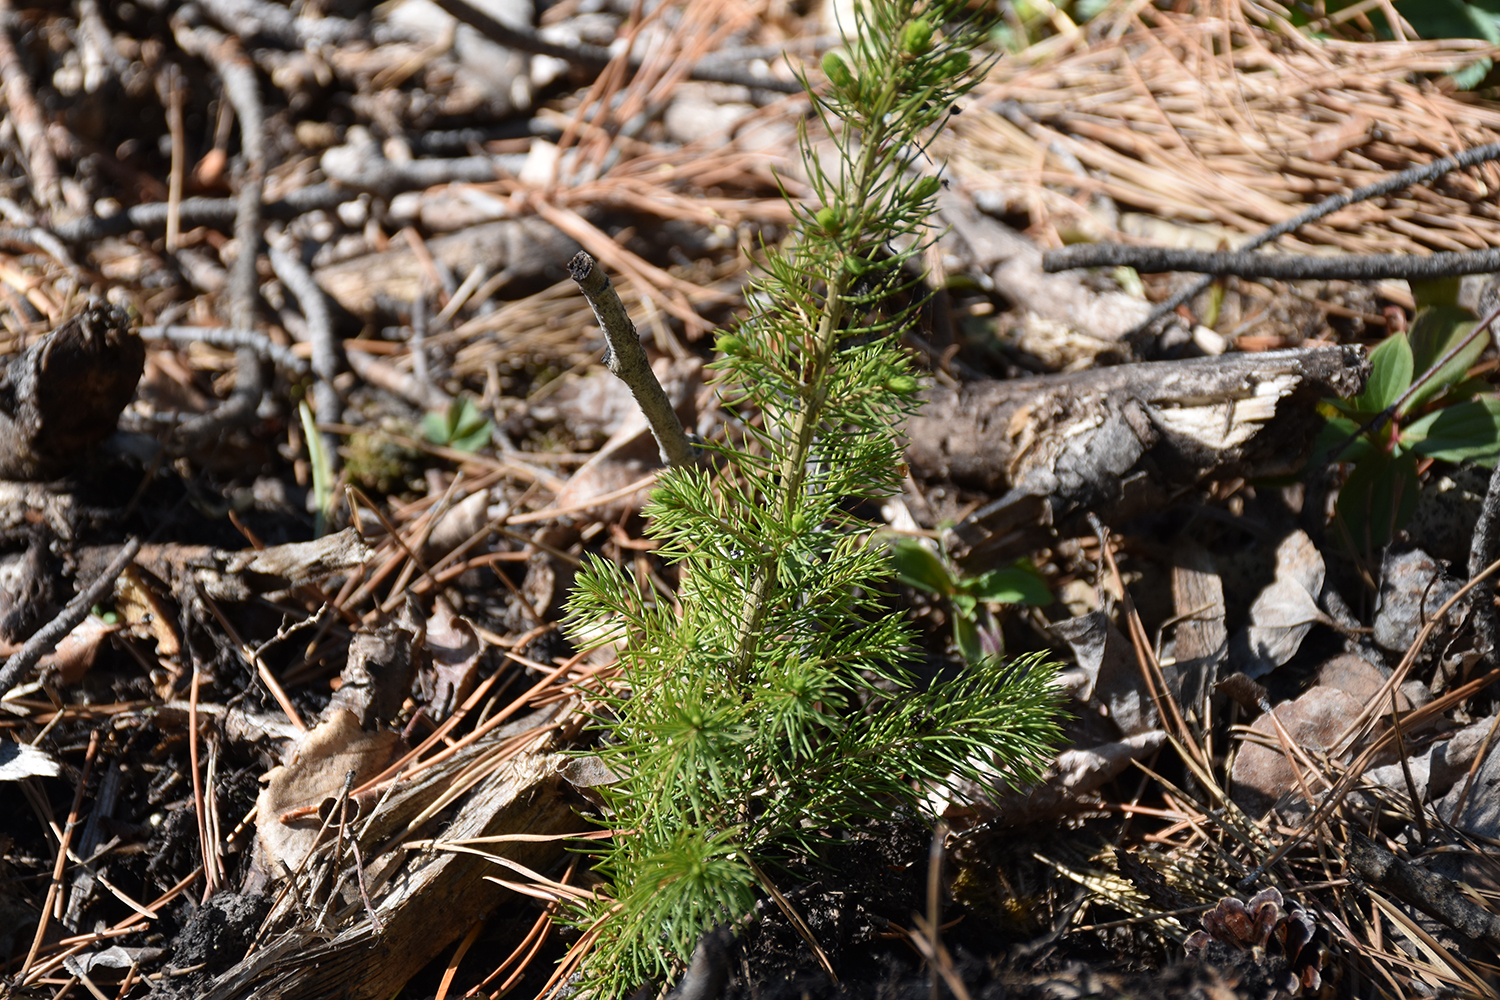 Beyond Beetle: Facilitated Lodgepole Pine Regeneration after MPB Attack in Lodgepole Pine Forests of West-central Alberta